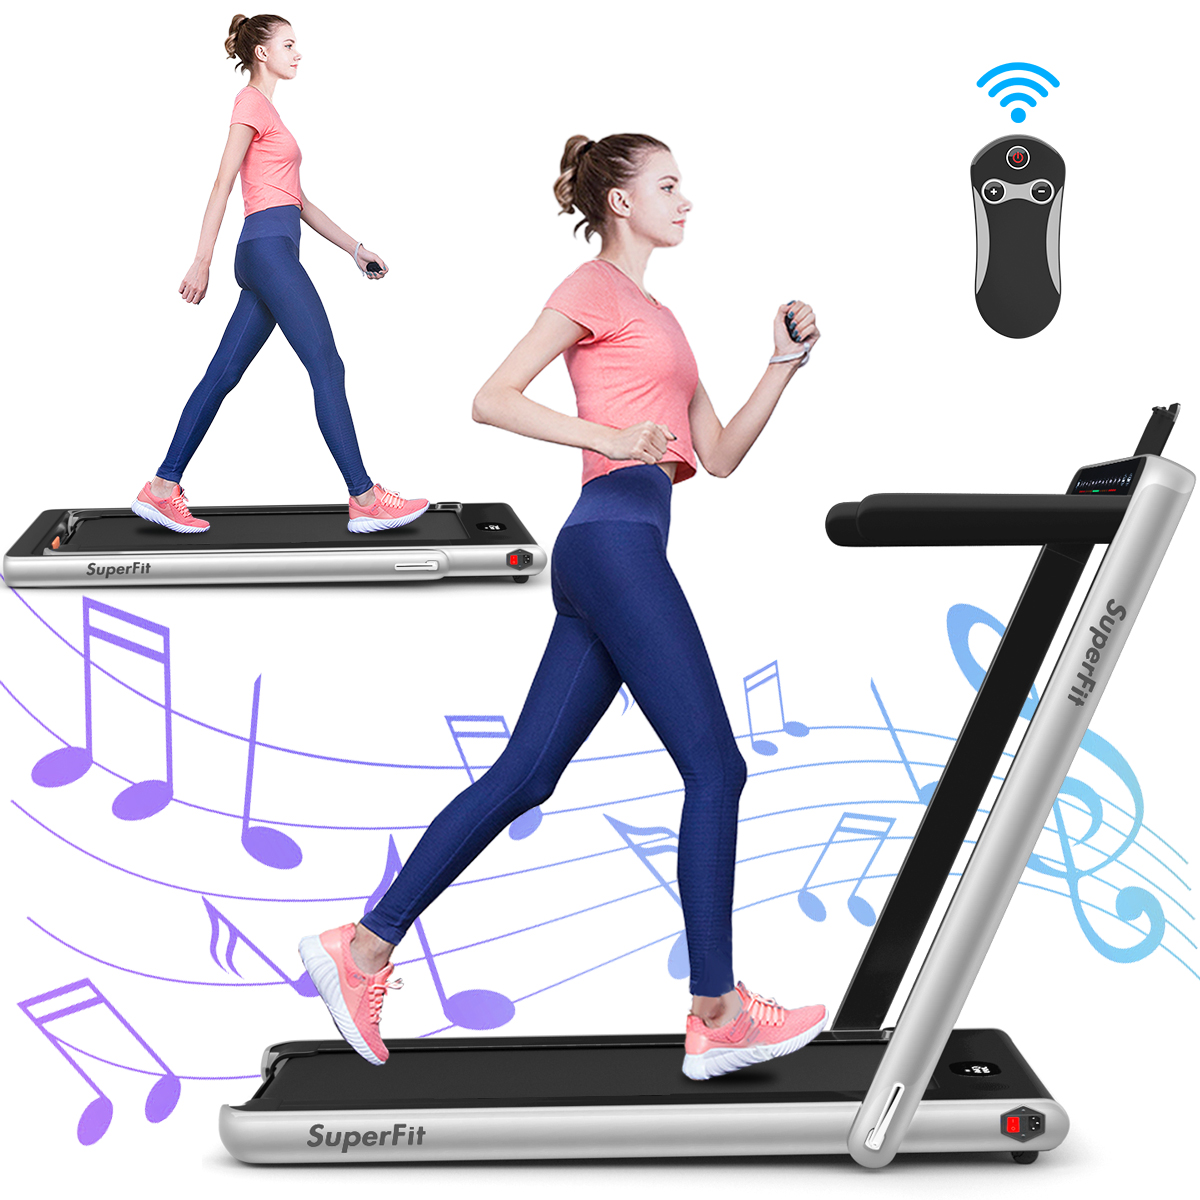 Gymax 2 in 1 Folding Treadmill 2.25HP Running Machine w/ Dual Display Silver - image 1 of 9